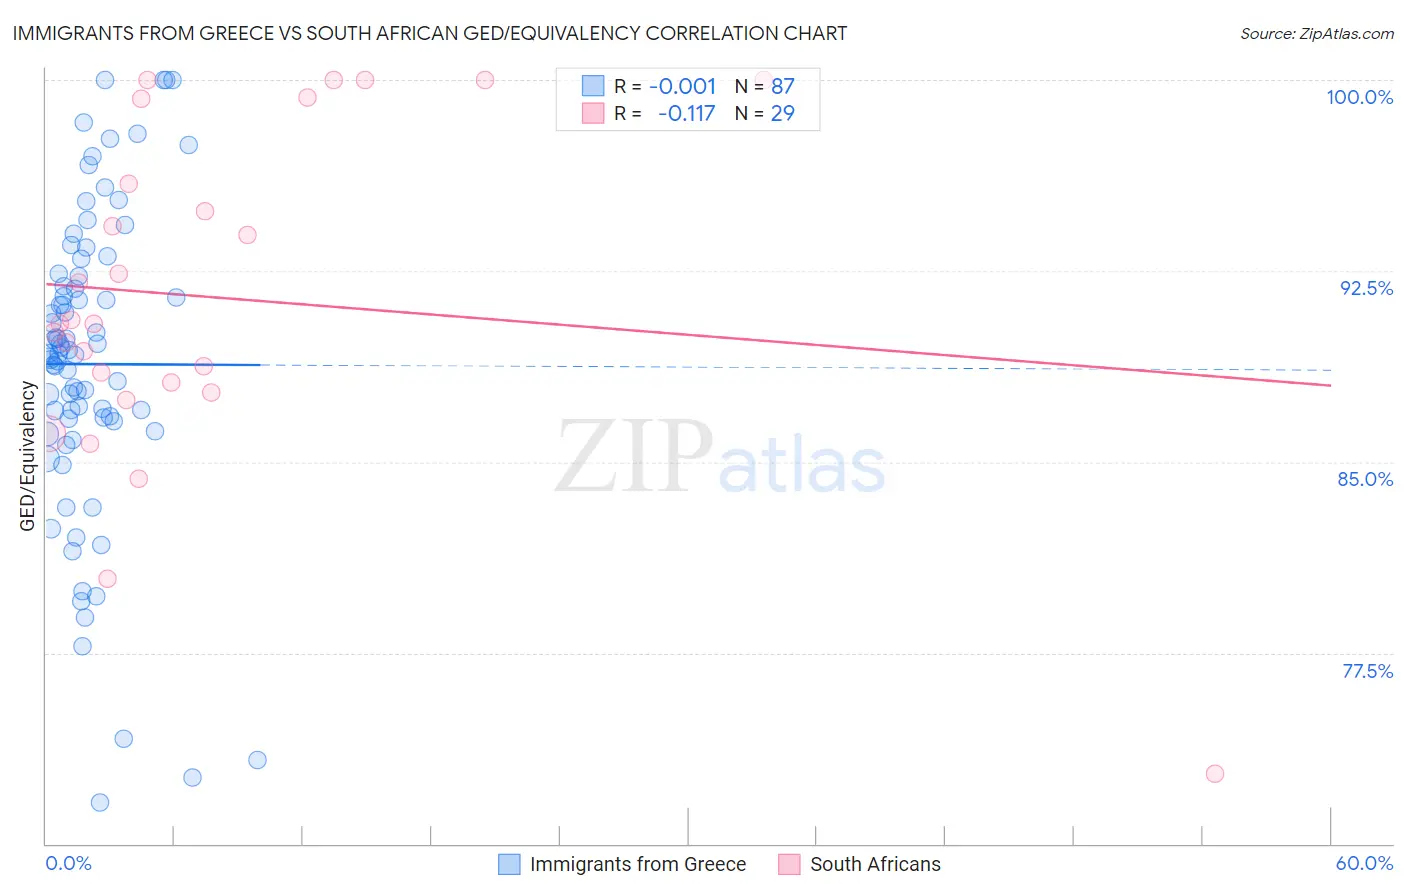 Immigrants from Greece vs South African GED/Equivalency